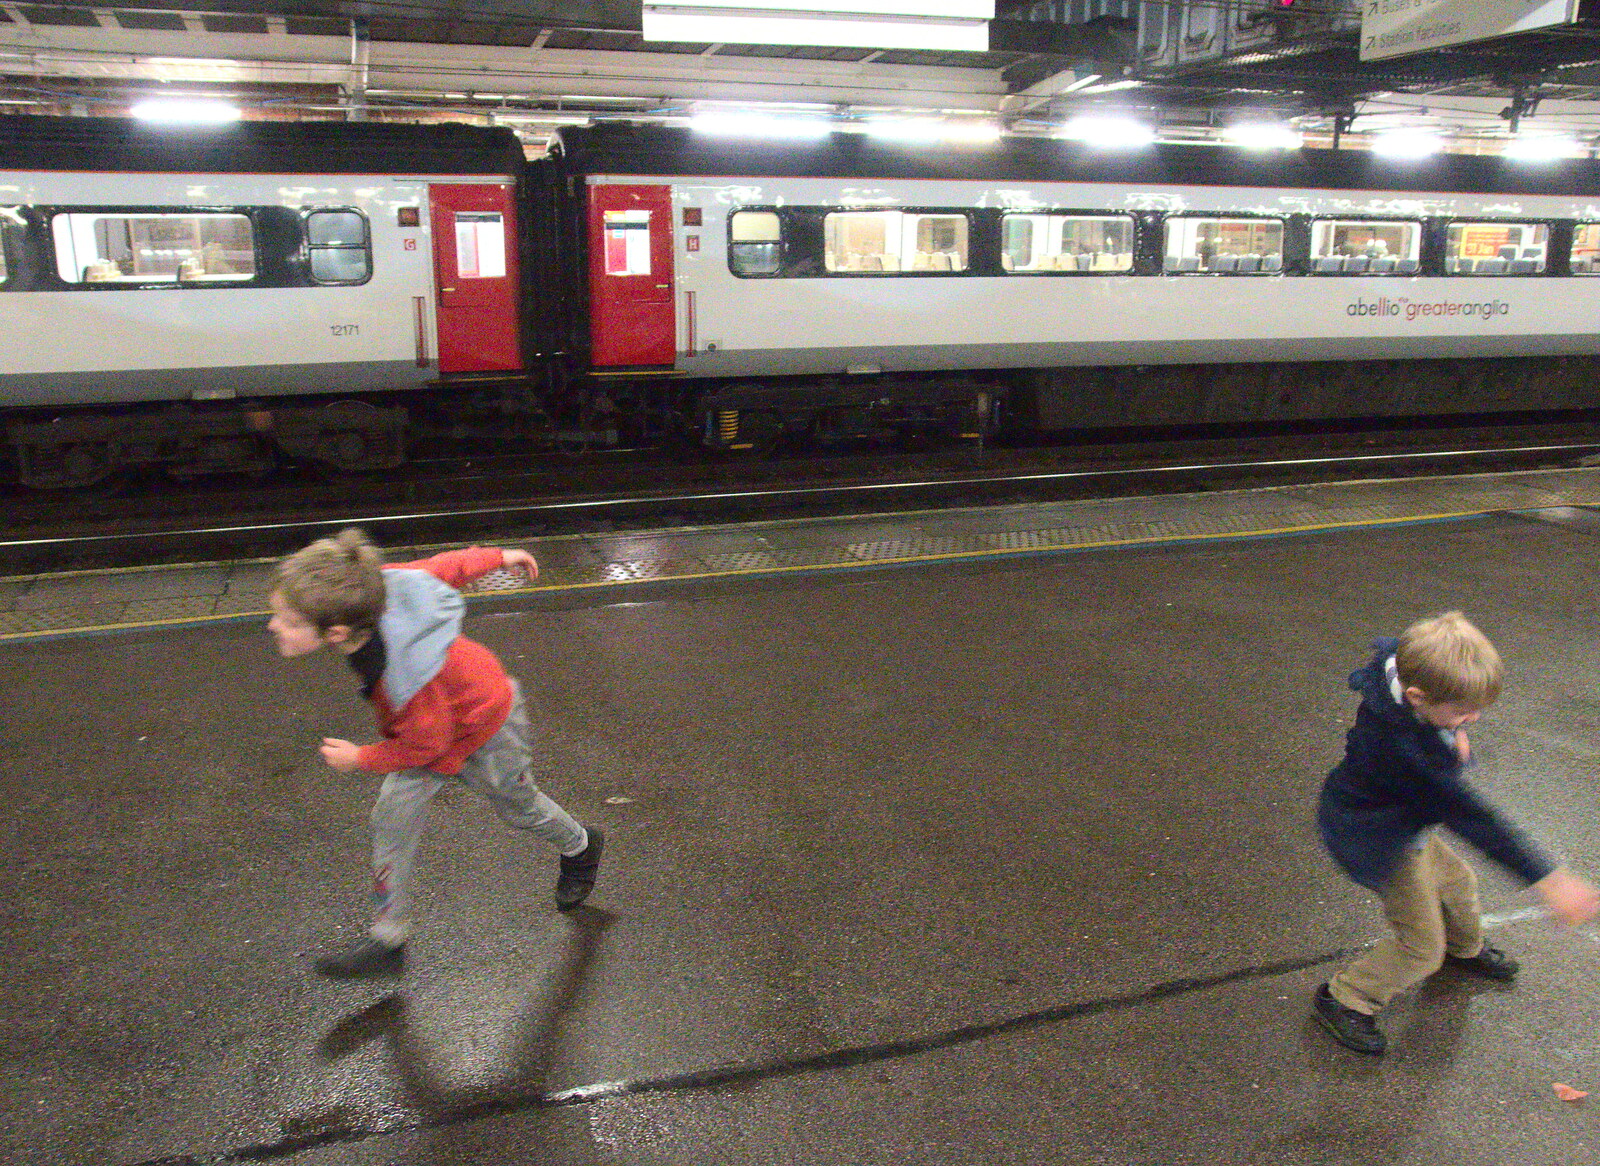 Fred and Harry on the platform at Ipswich from Isobel Goes to Lyon, Ipswich Station, Burrell Road - 24th January 2016